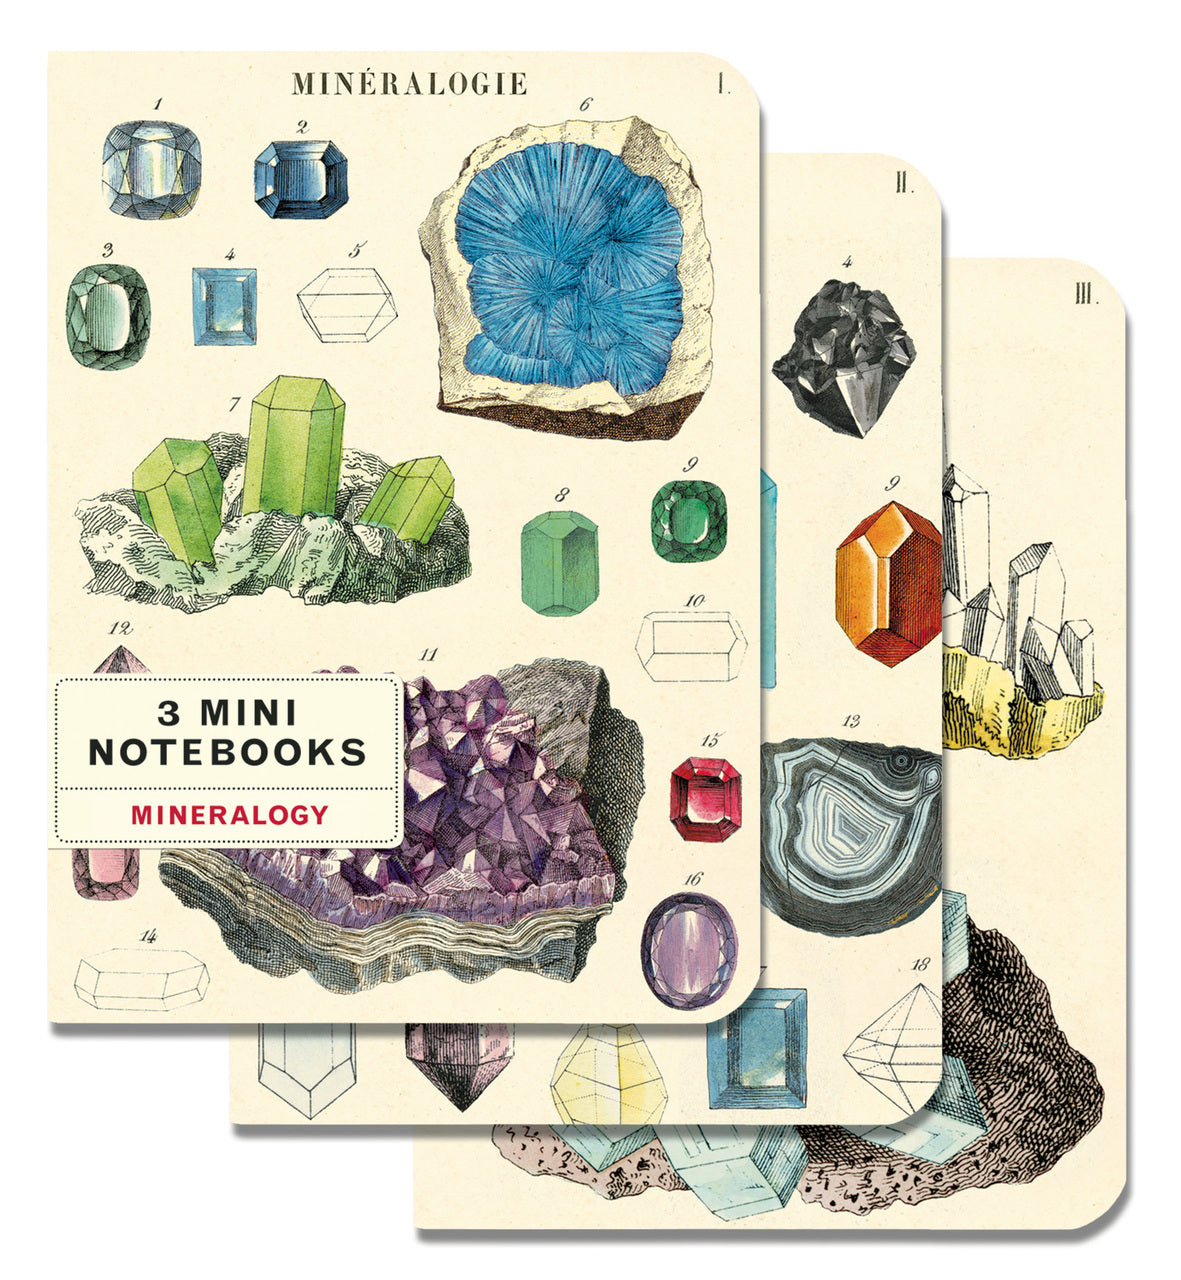 This mini notebook set of three high quality notebooks features bright and colorful reproductions of vintage scientific images to motivate anyone to get outdoors and be a rockhound!